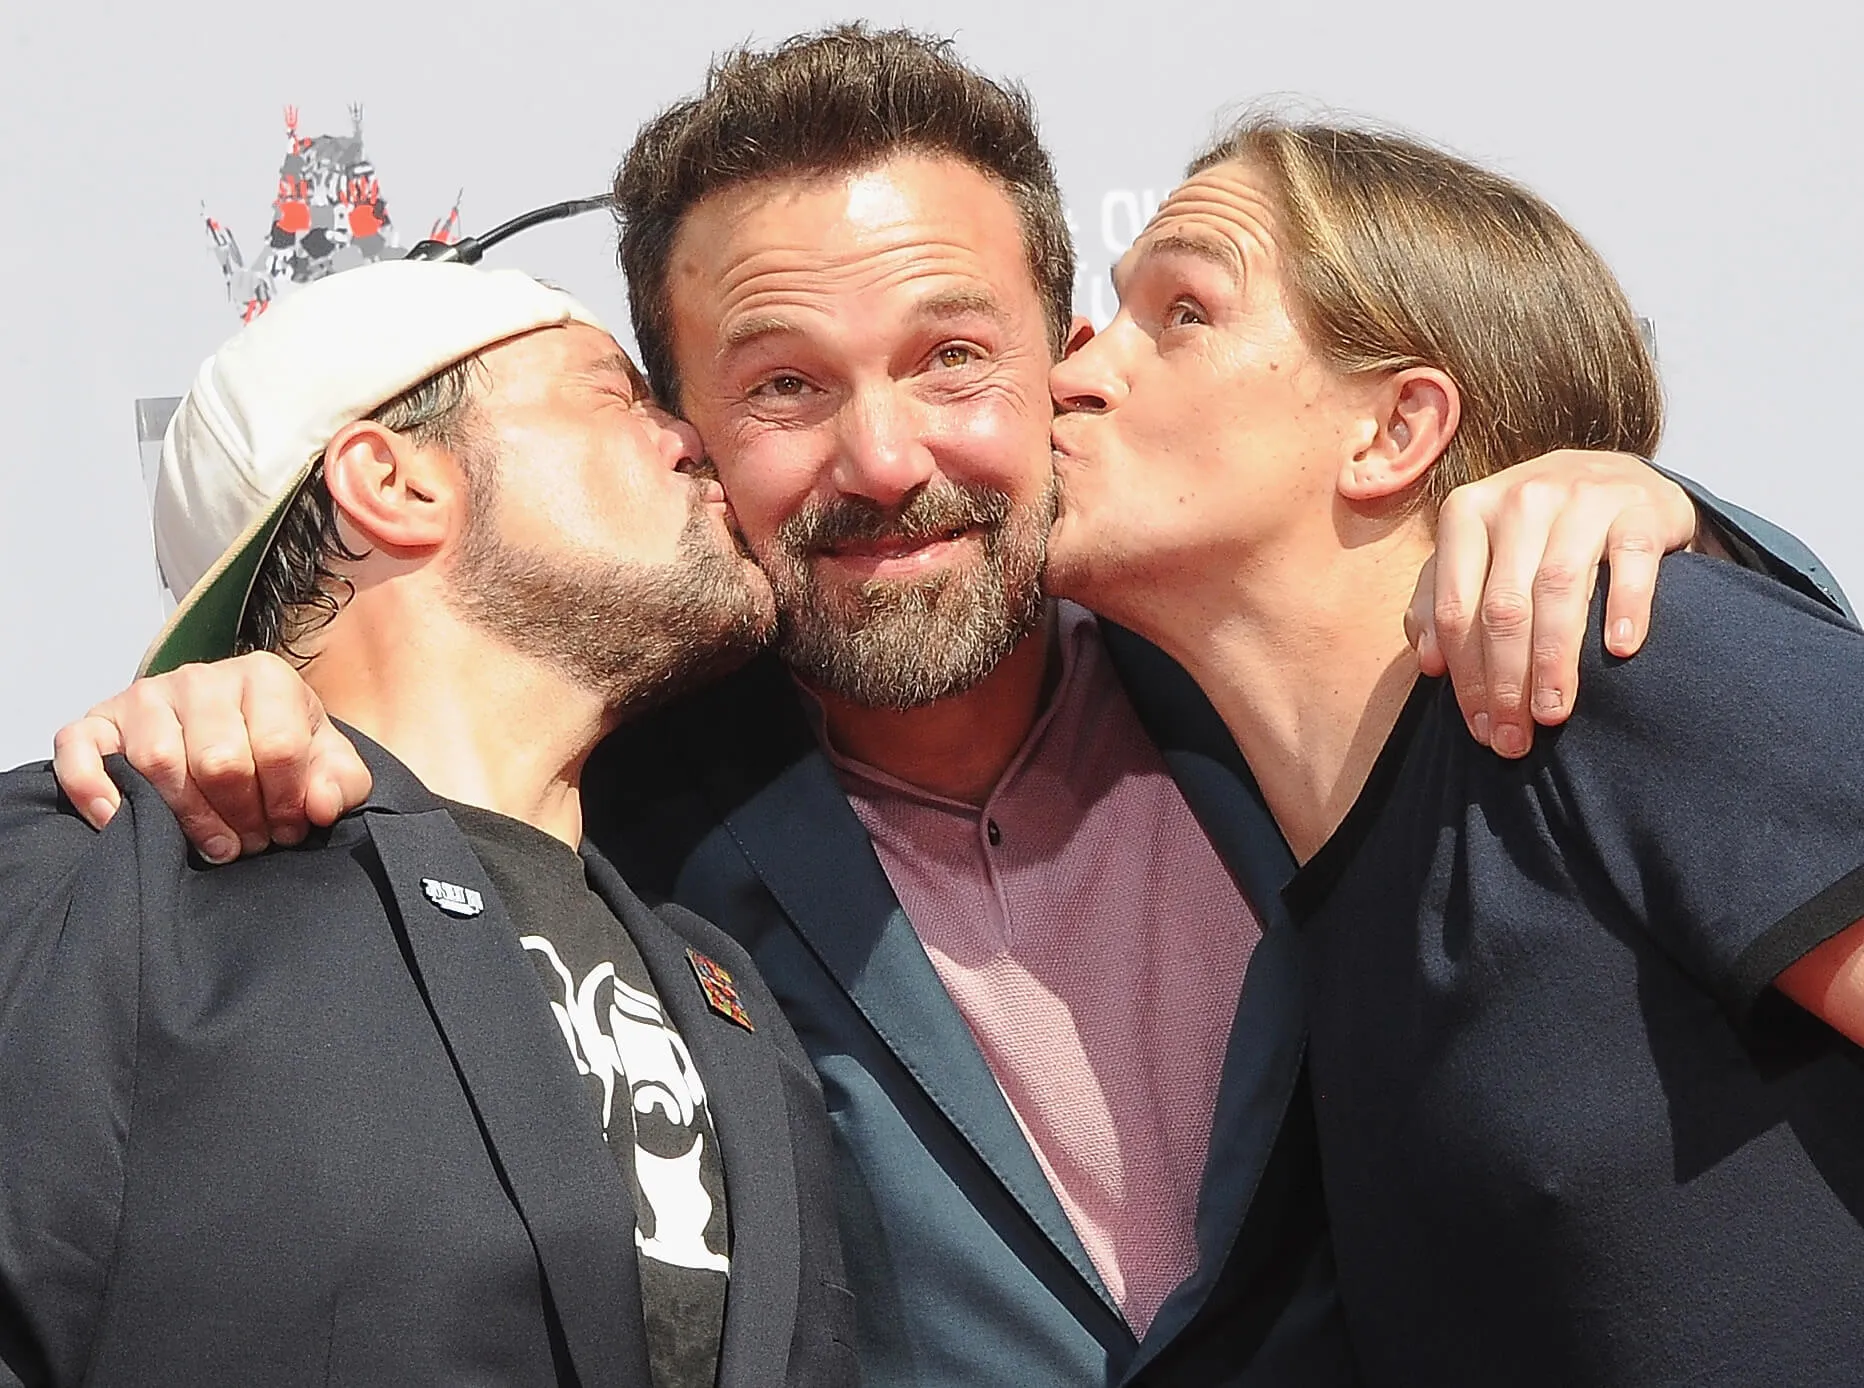 Kevin Smith and Jason Mewes kissing either side of Ben Affleck's cheeks as he holds on to their shoulders and smiles